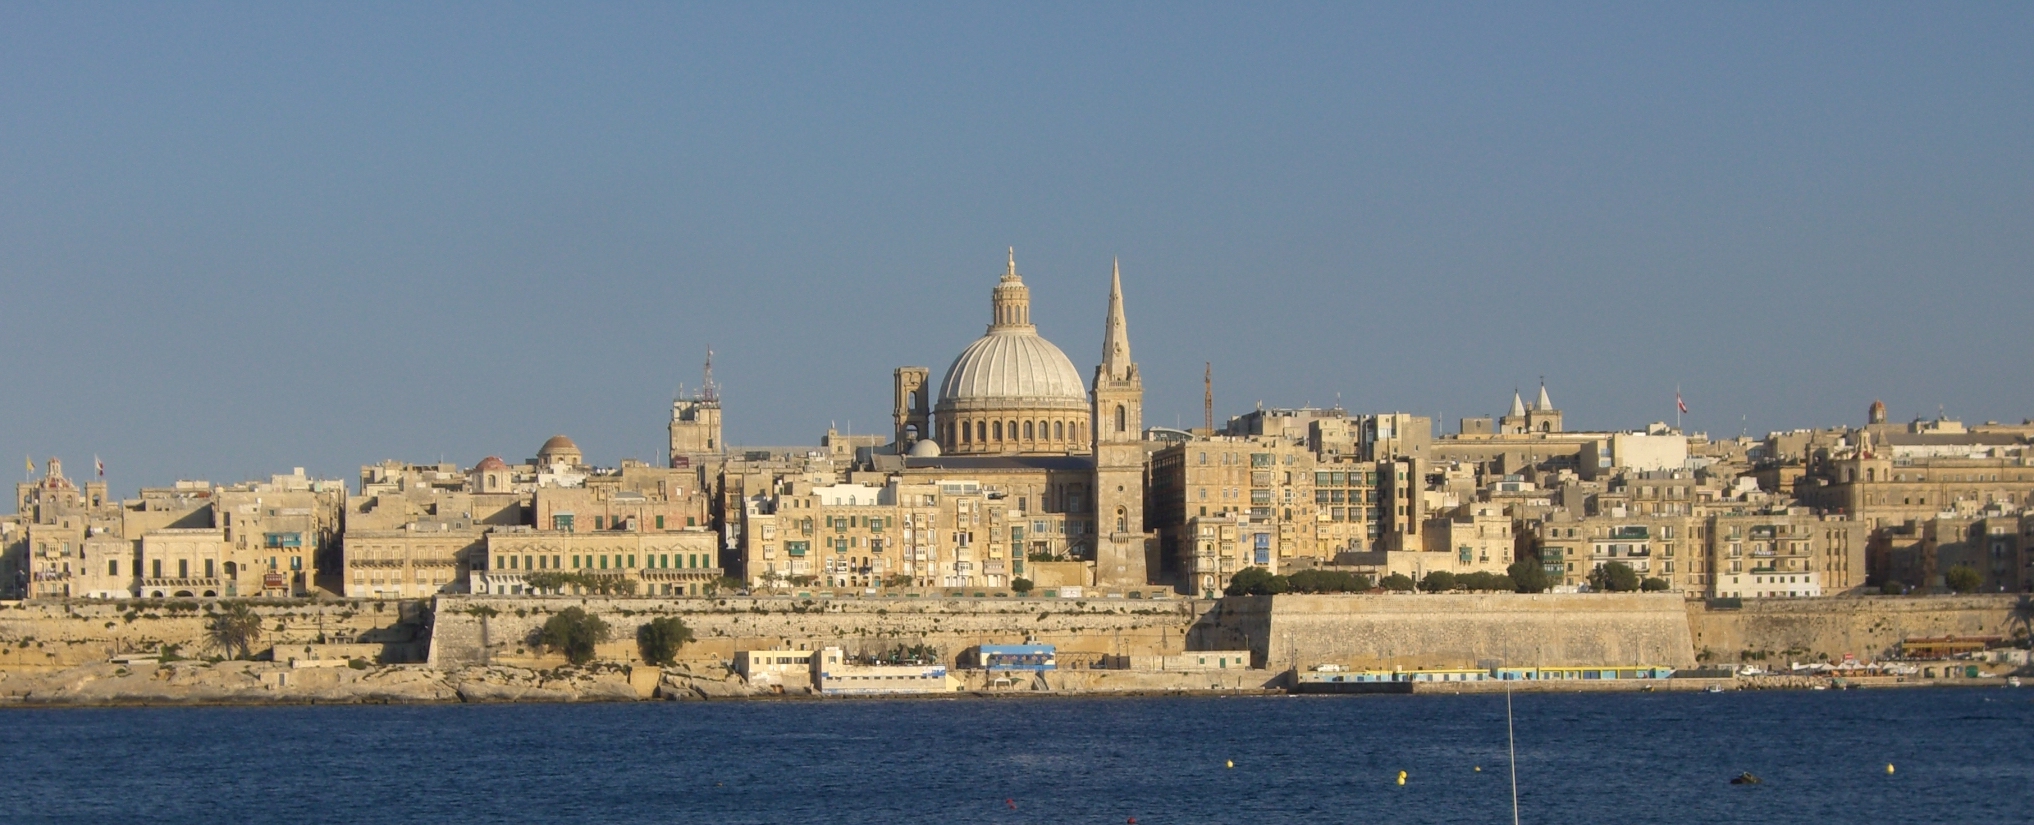  St. John's Co-Cathedral is located within the fortified city of Valletta, the capital city of Malta.&nbsp;  Image © Katey Corda, 2012 